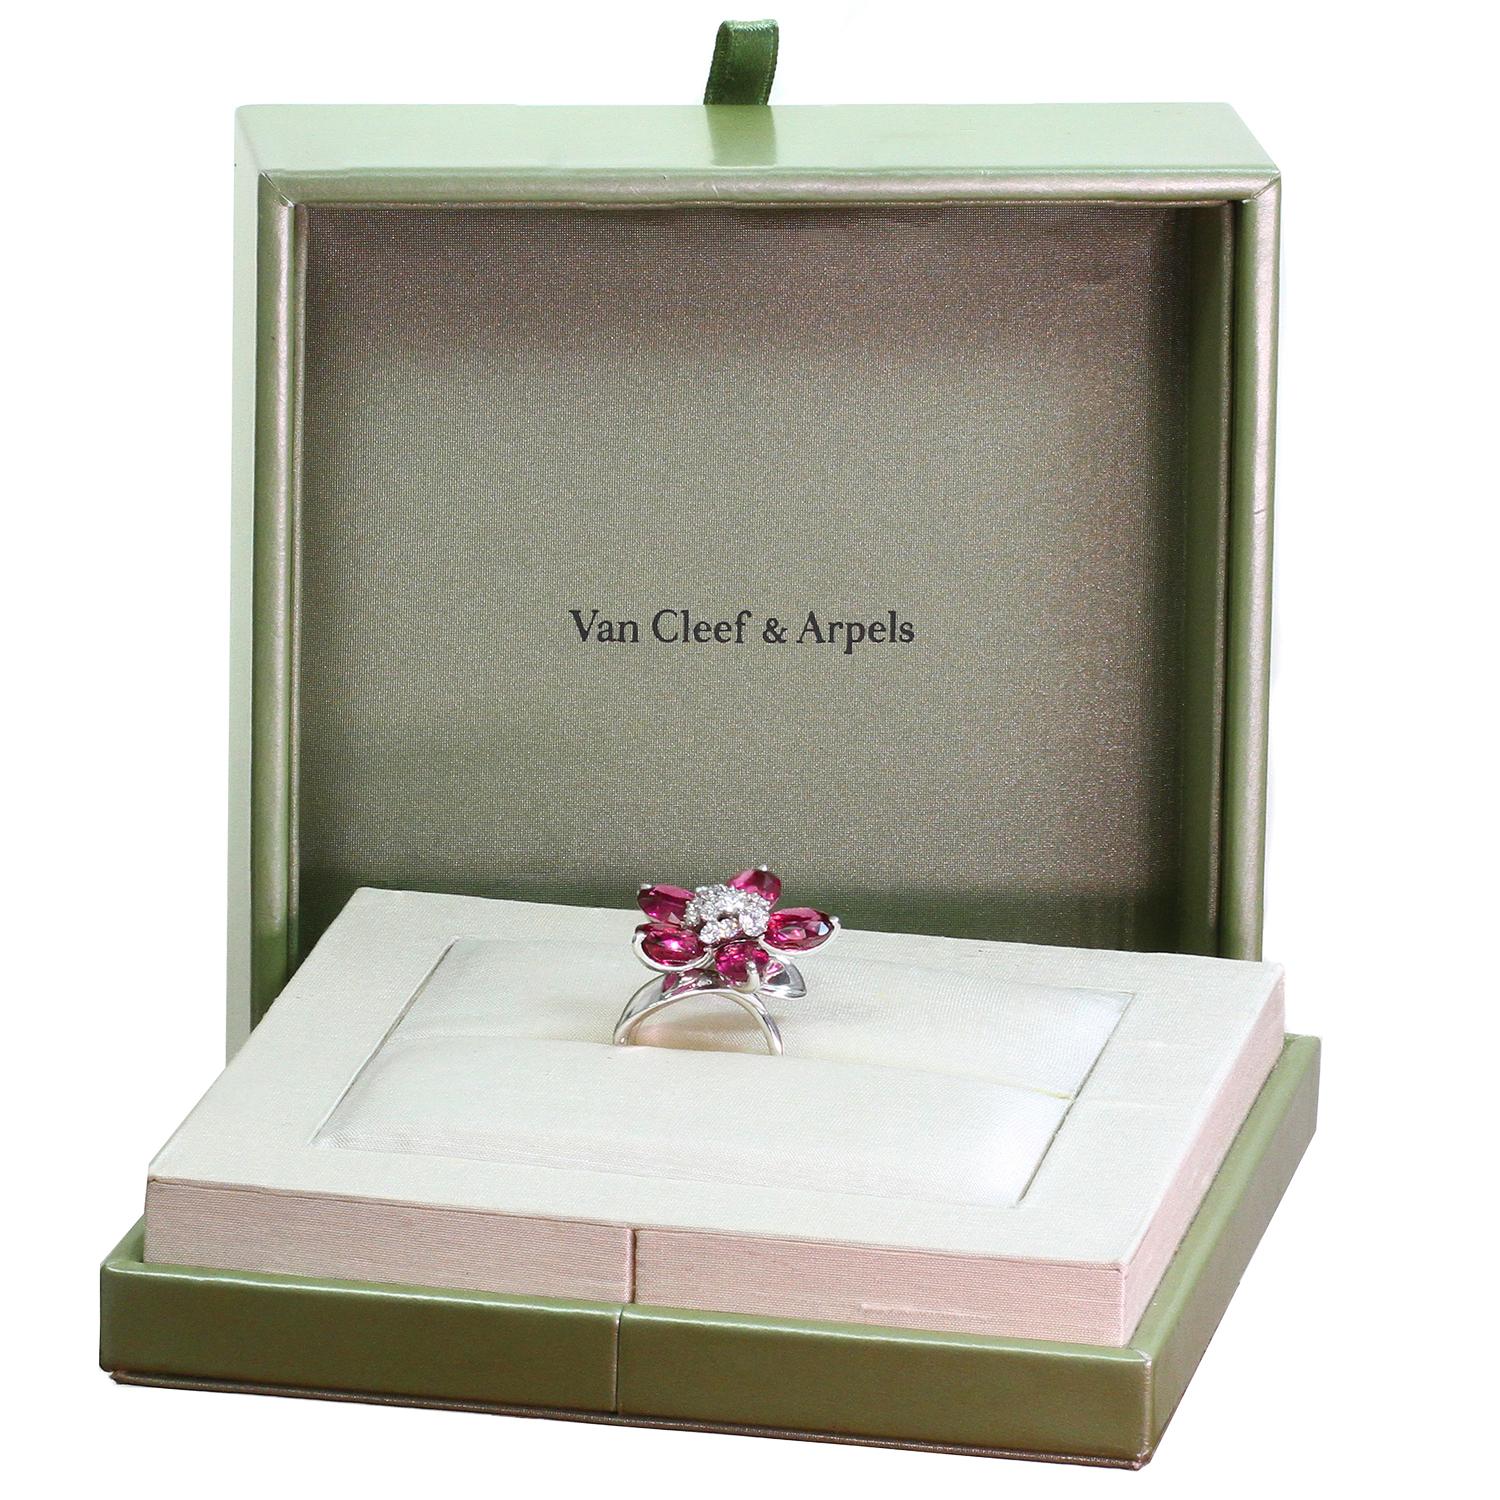 This spectacular Van Cleef & Arpels ring from the vibrant Hawaii collection is designed as a sparkling flower featuring five petals set with graduated oval cut pink rubellites and accented with a central cluster of round brilliant D-F VVS1-VVS2